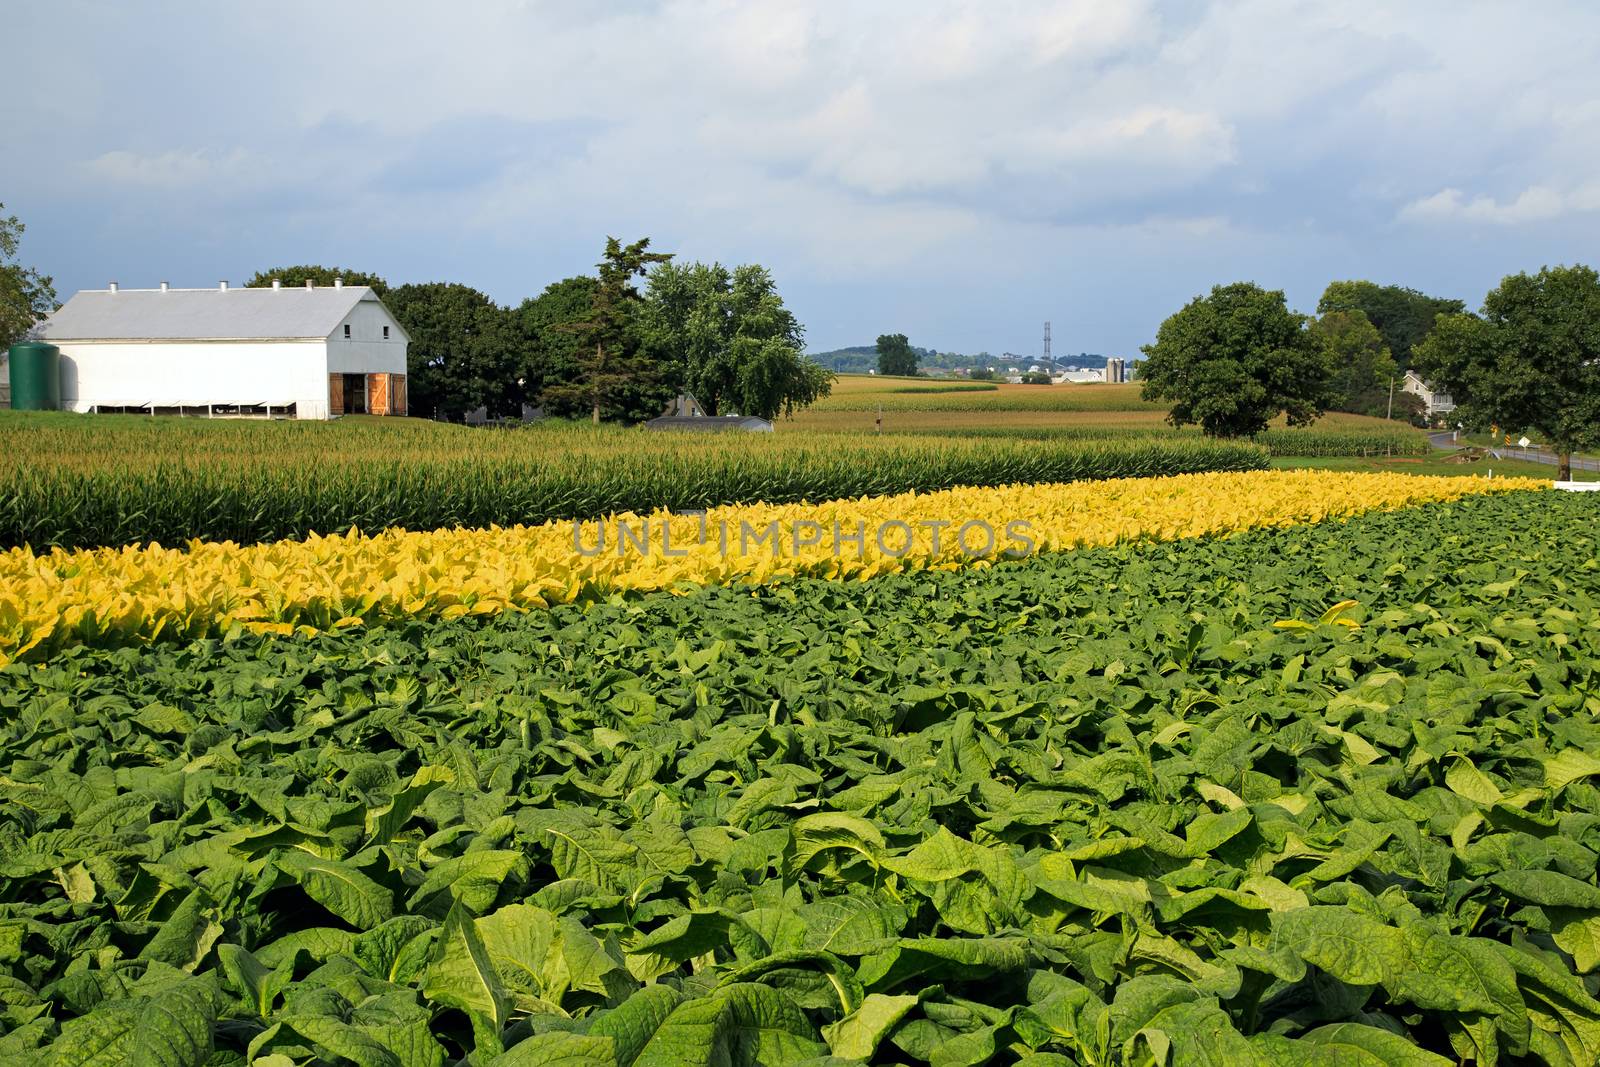 Green tobacco,yellow tobacco and corn ready for harvest on a Lancaster County, Pennsylvania farm.